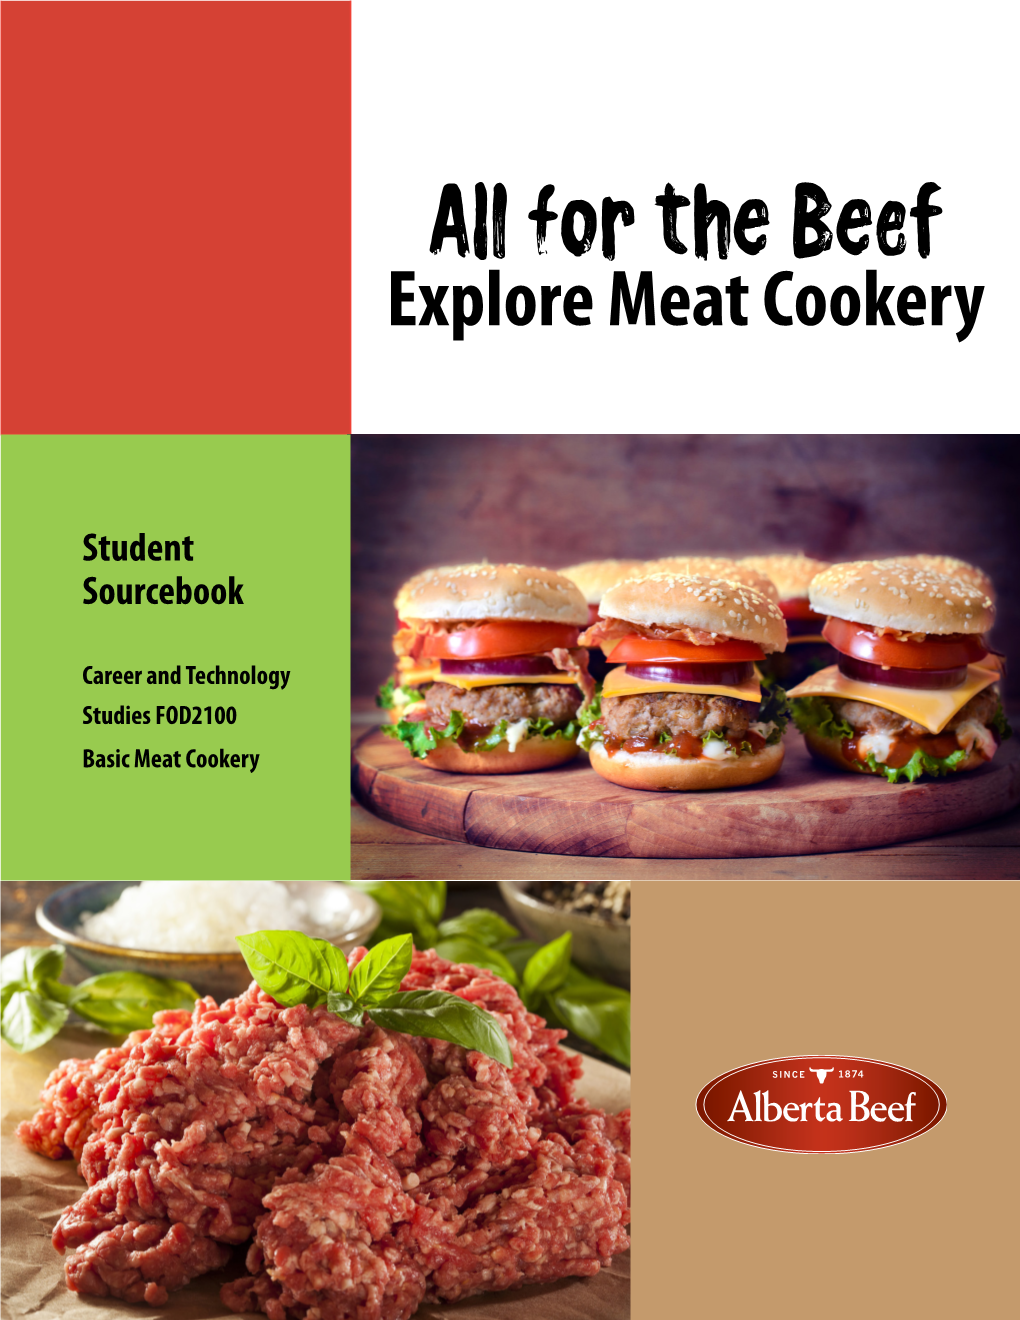 For the Beef Explore Meat Cookery